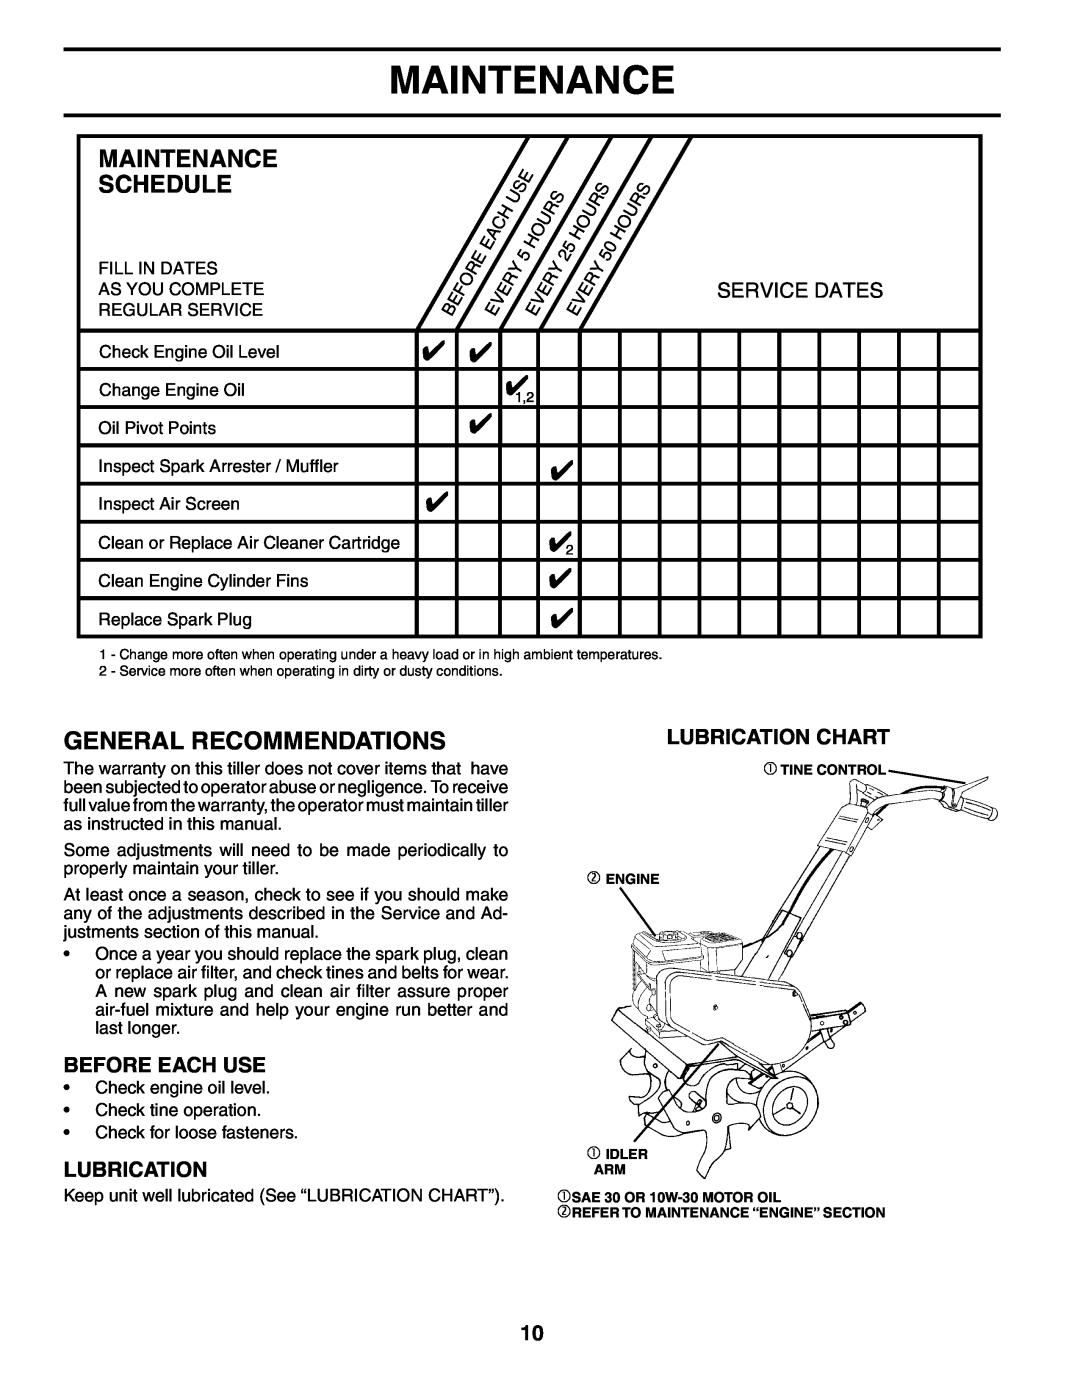 Poulan HDF550N General Recommendations, Before Each Use, Lubrication Chart, Maintenance Schedule, Service Dates 